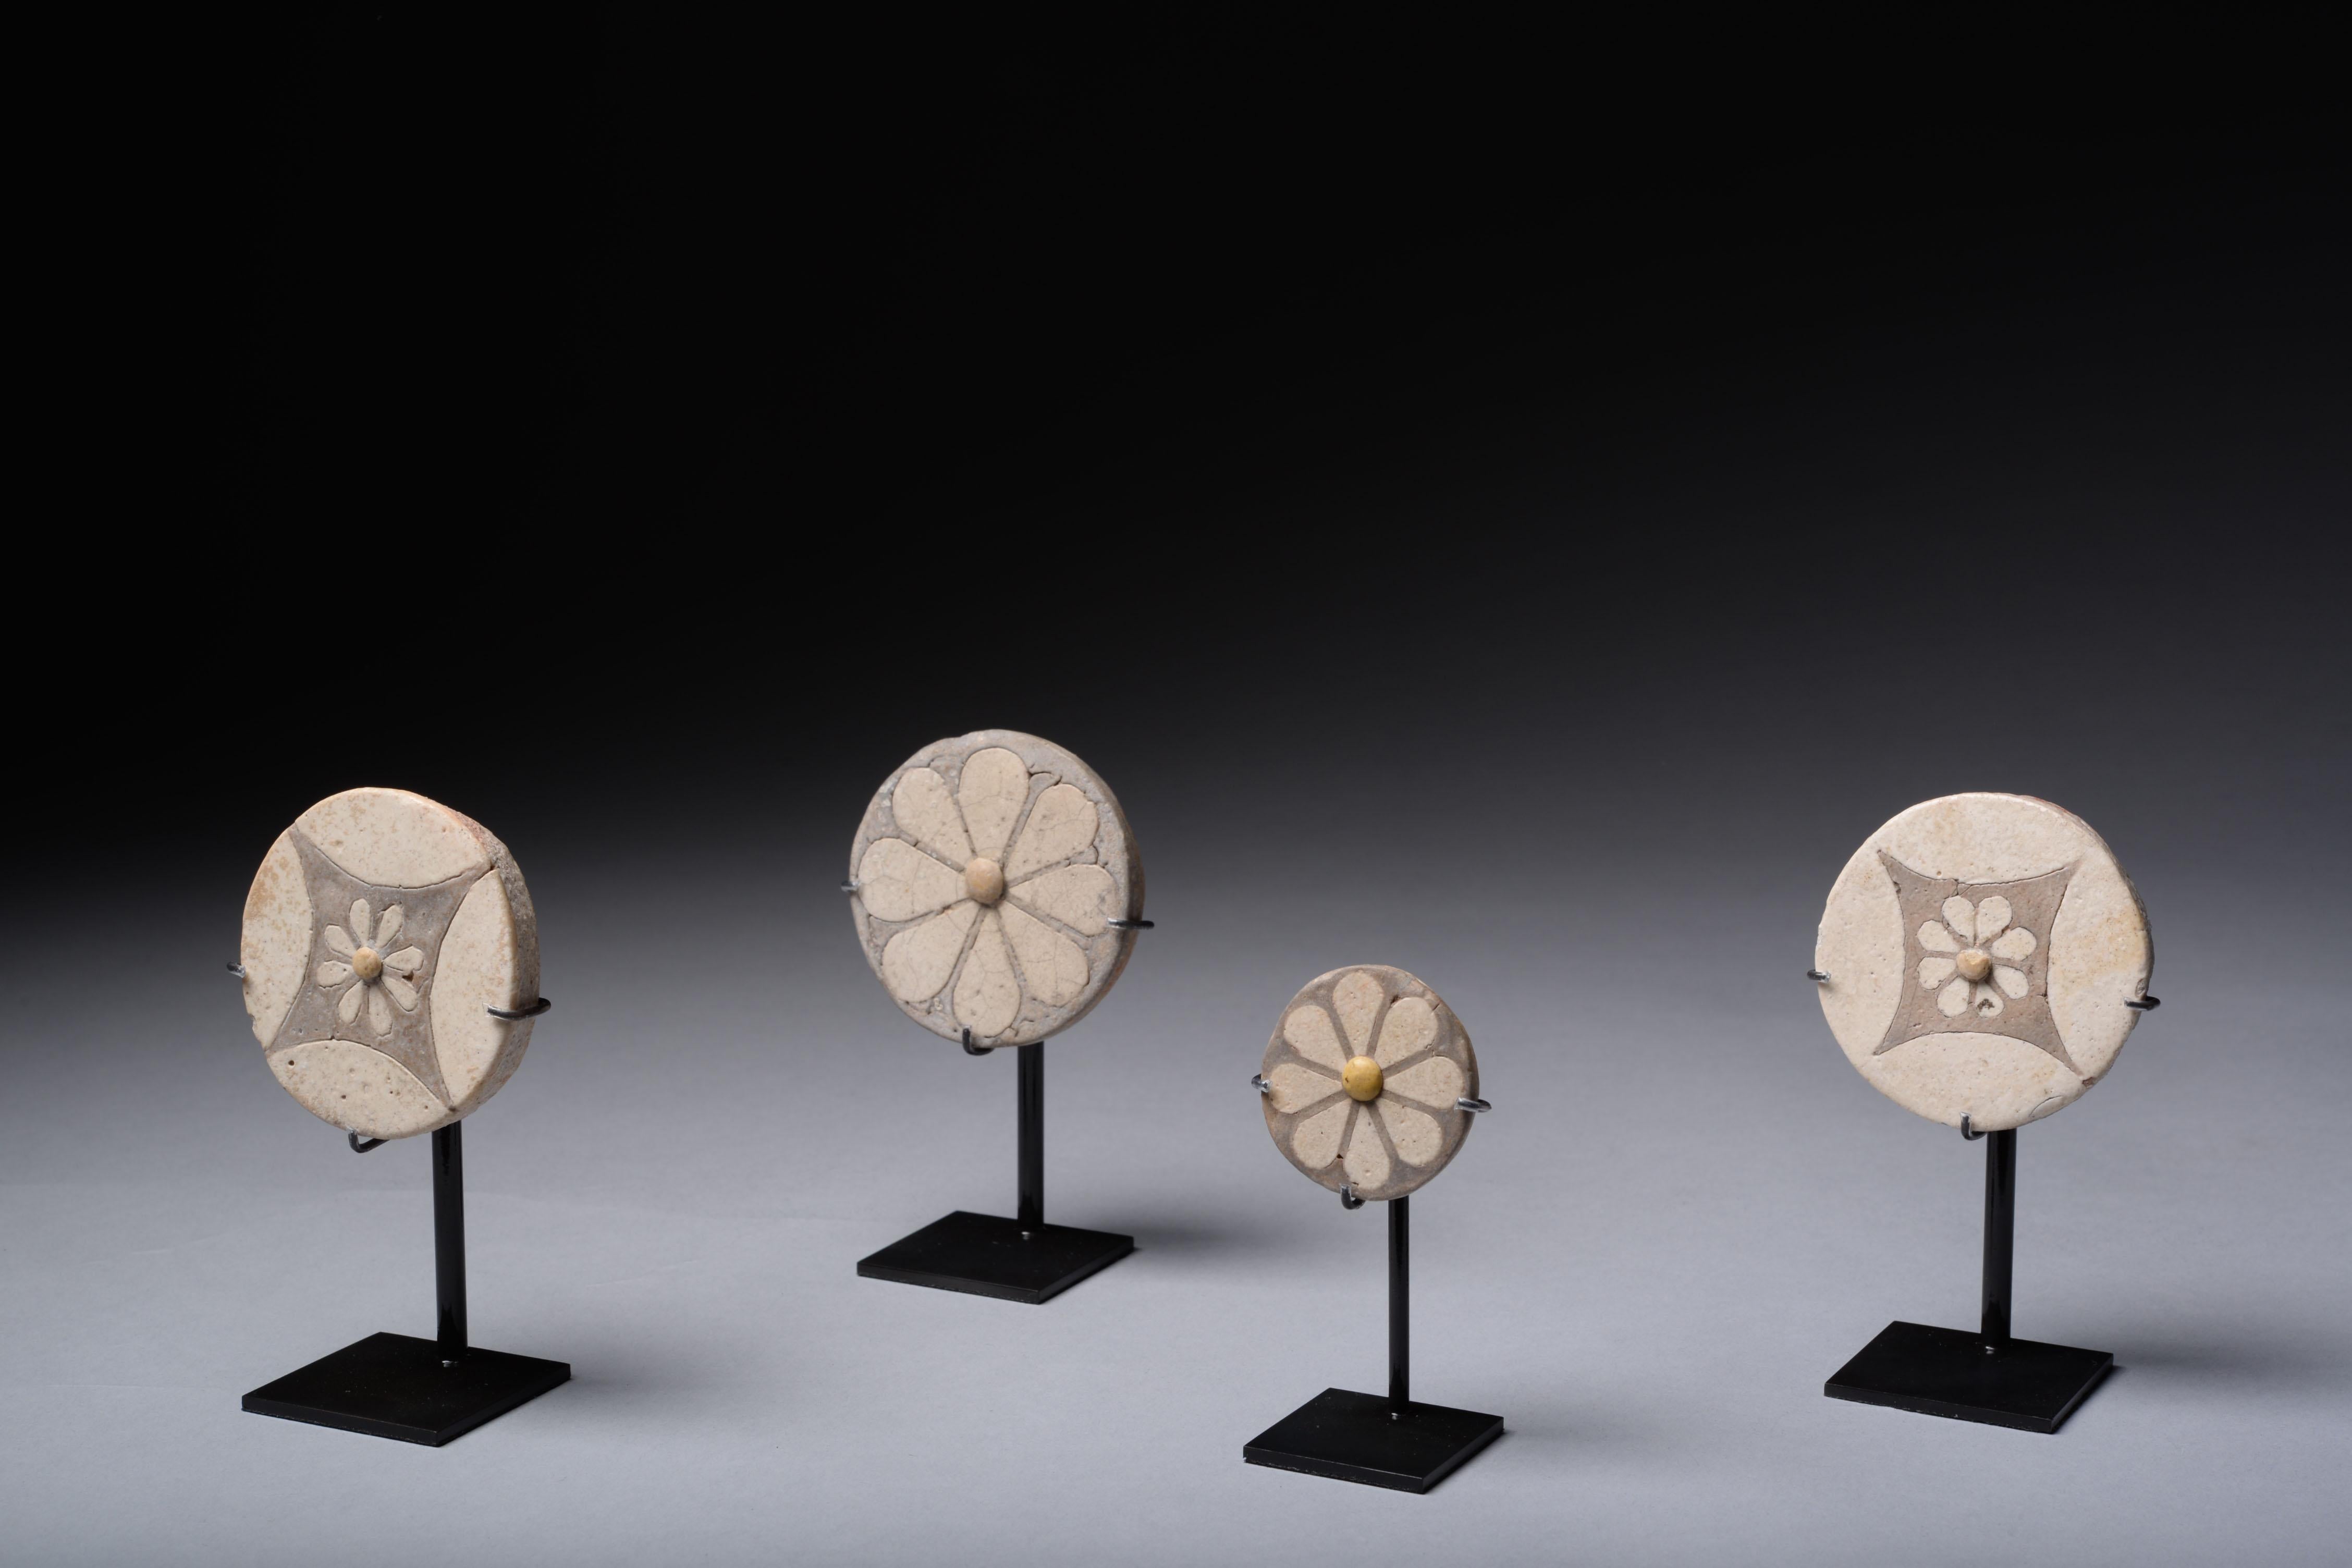 Four Egyptian faience rosettes, dating to the New Kingdom, Reign of Ramesses, 1550-1295 BC.

These remarkable inlays are often called rosettes, though they probably depict daisies or mayflowers. They demonstrate accomplishment in faience artistry,